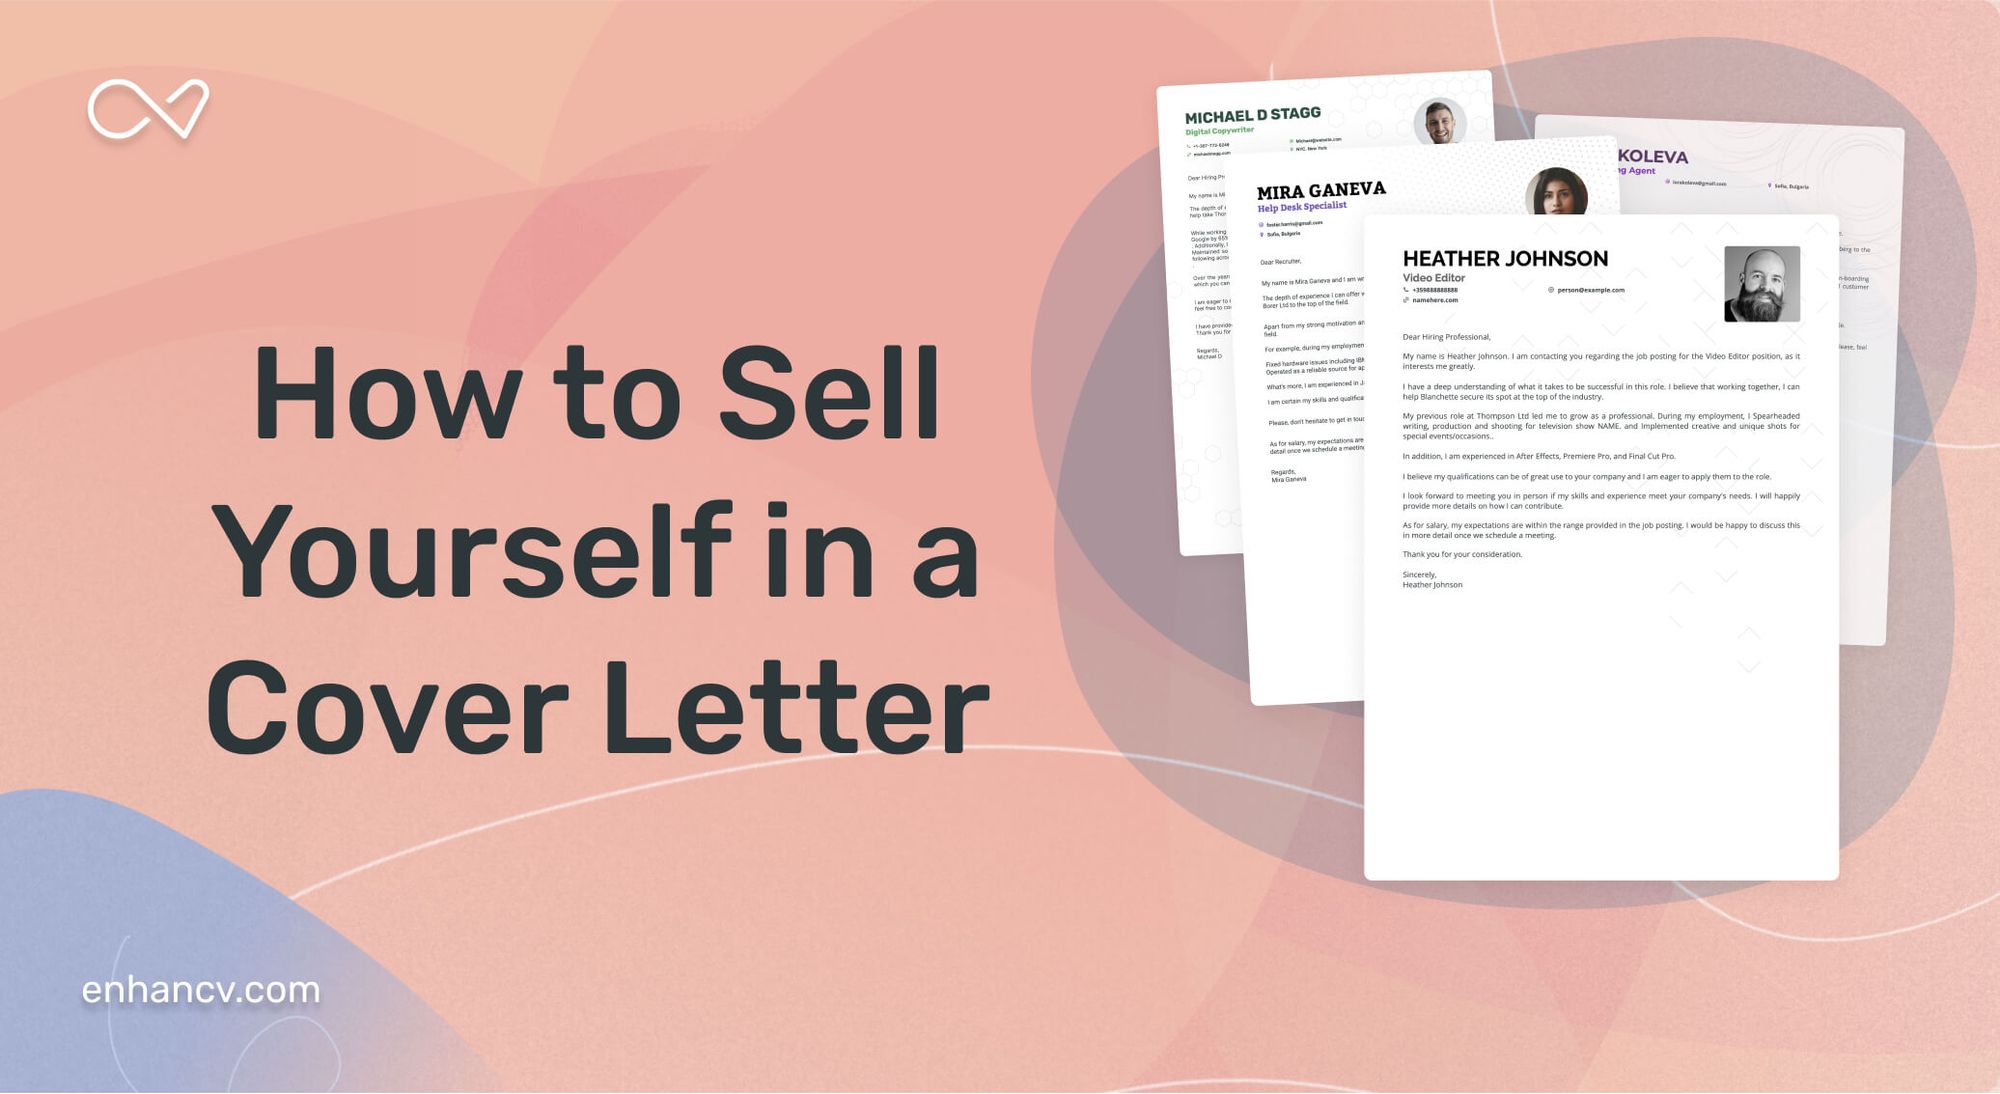 How to Sell Yourself in a Cover Letter